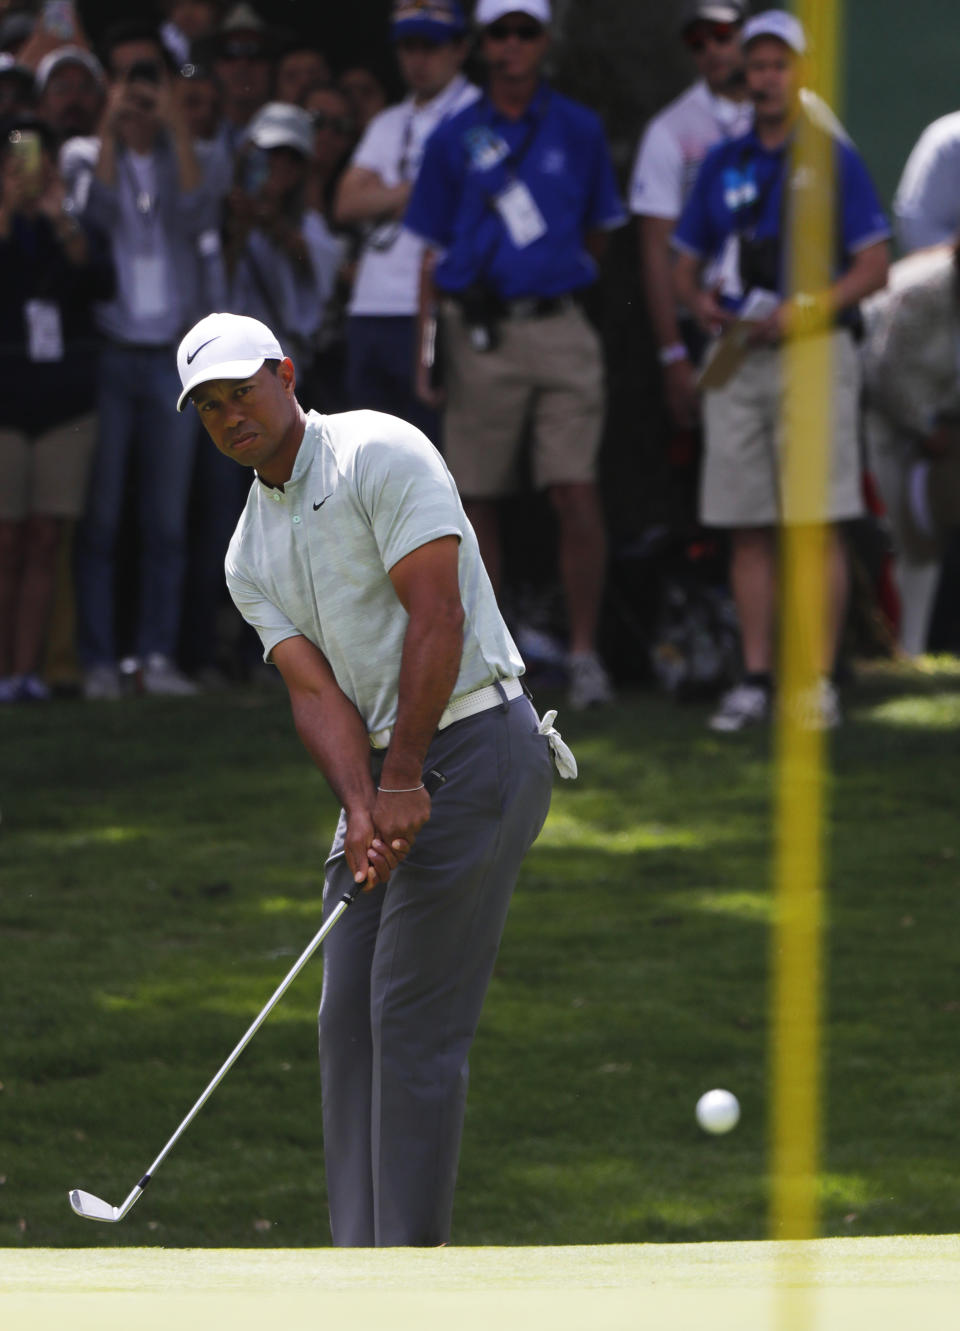 Tiger Woods chips the ball into the 1st hole green, on the third round of competition of the WGC-Mexico Championship at the Chapultepec Golf Club in Mexico City, Saturday, Feb. 23, 2019. (AP Photo/Marco Ugarte)